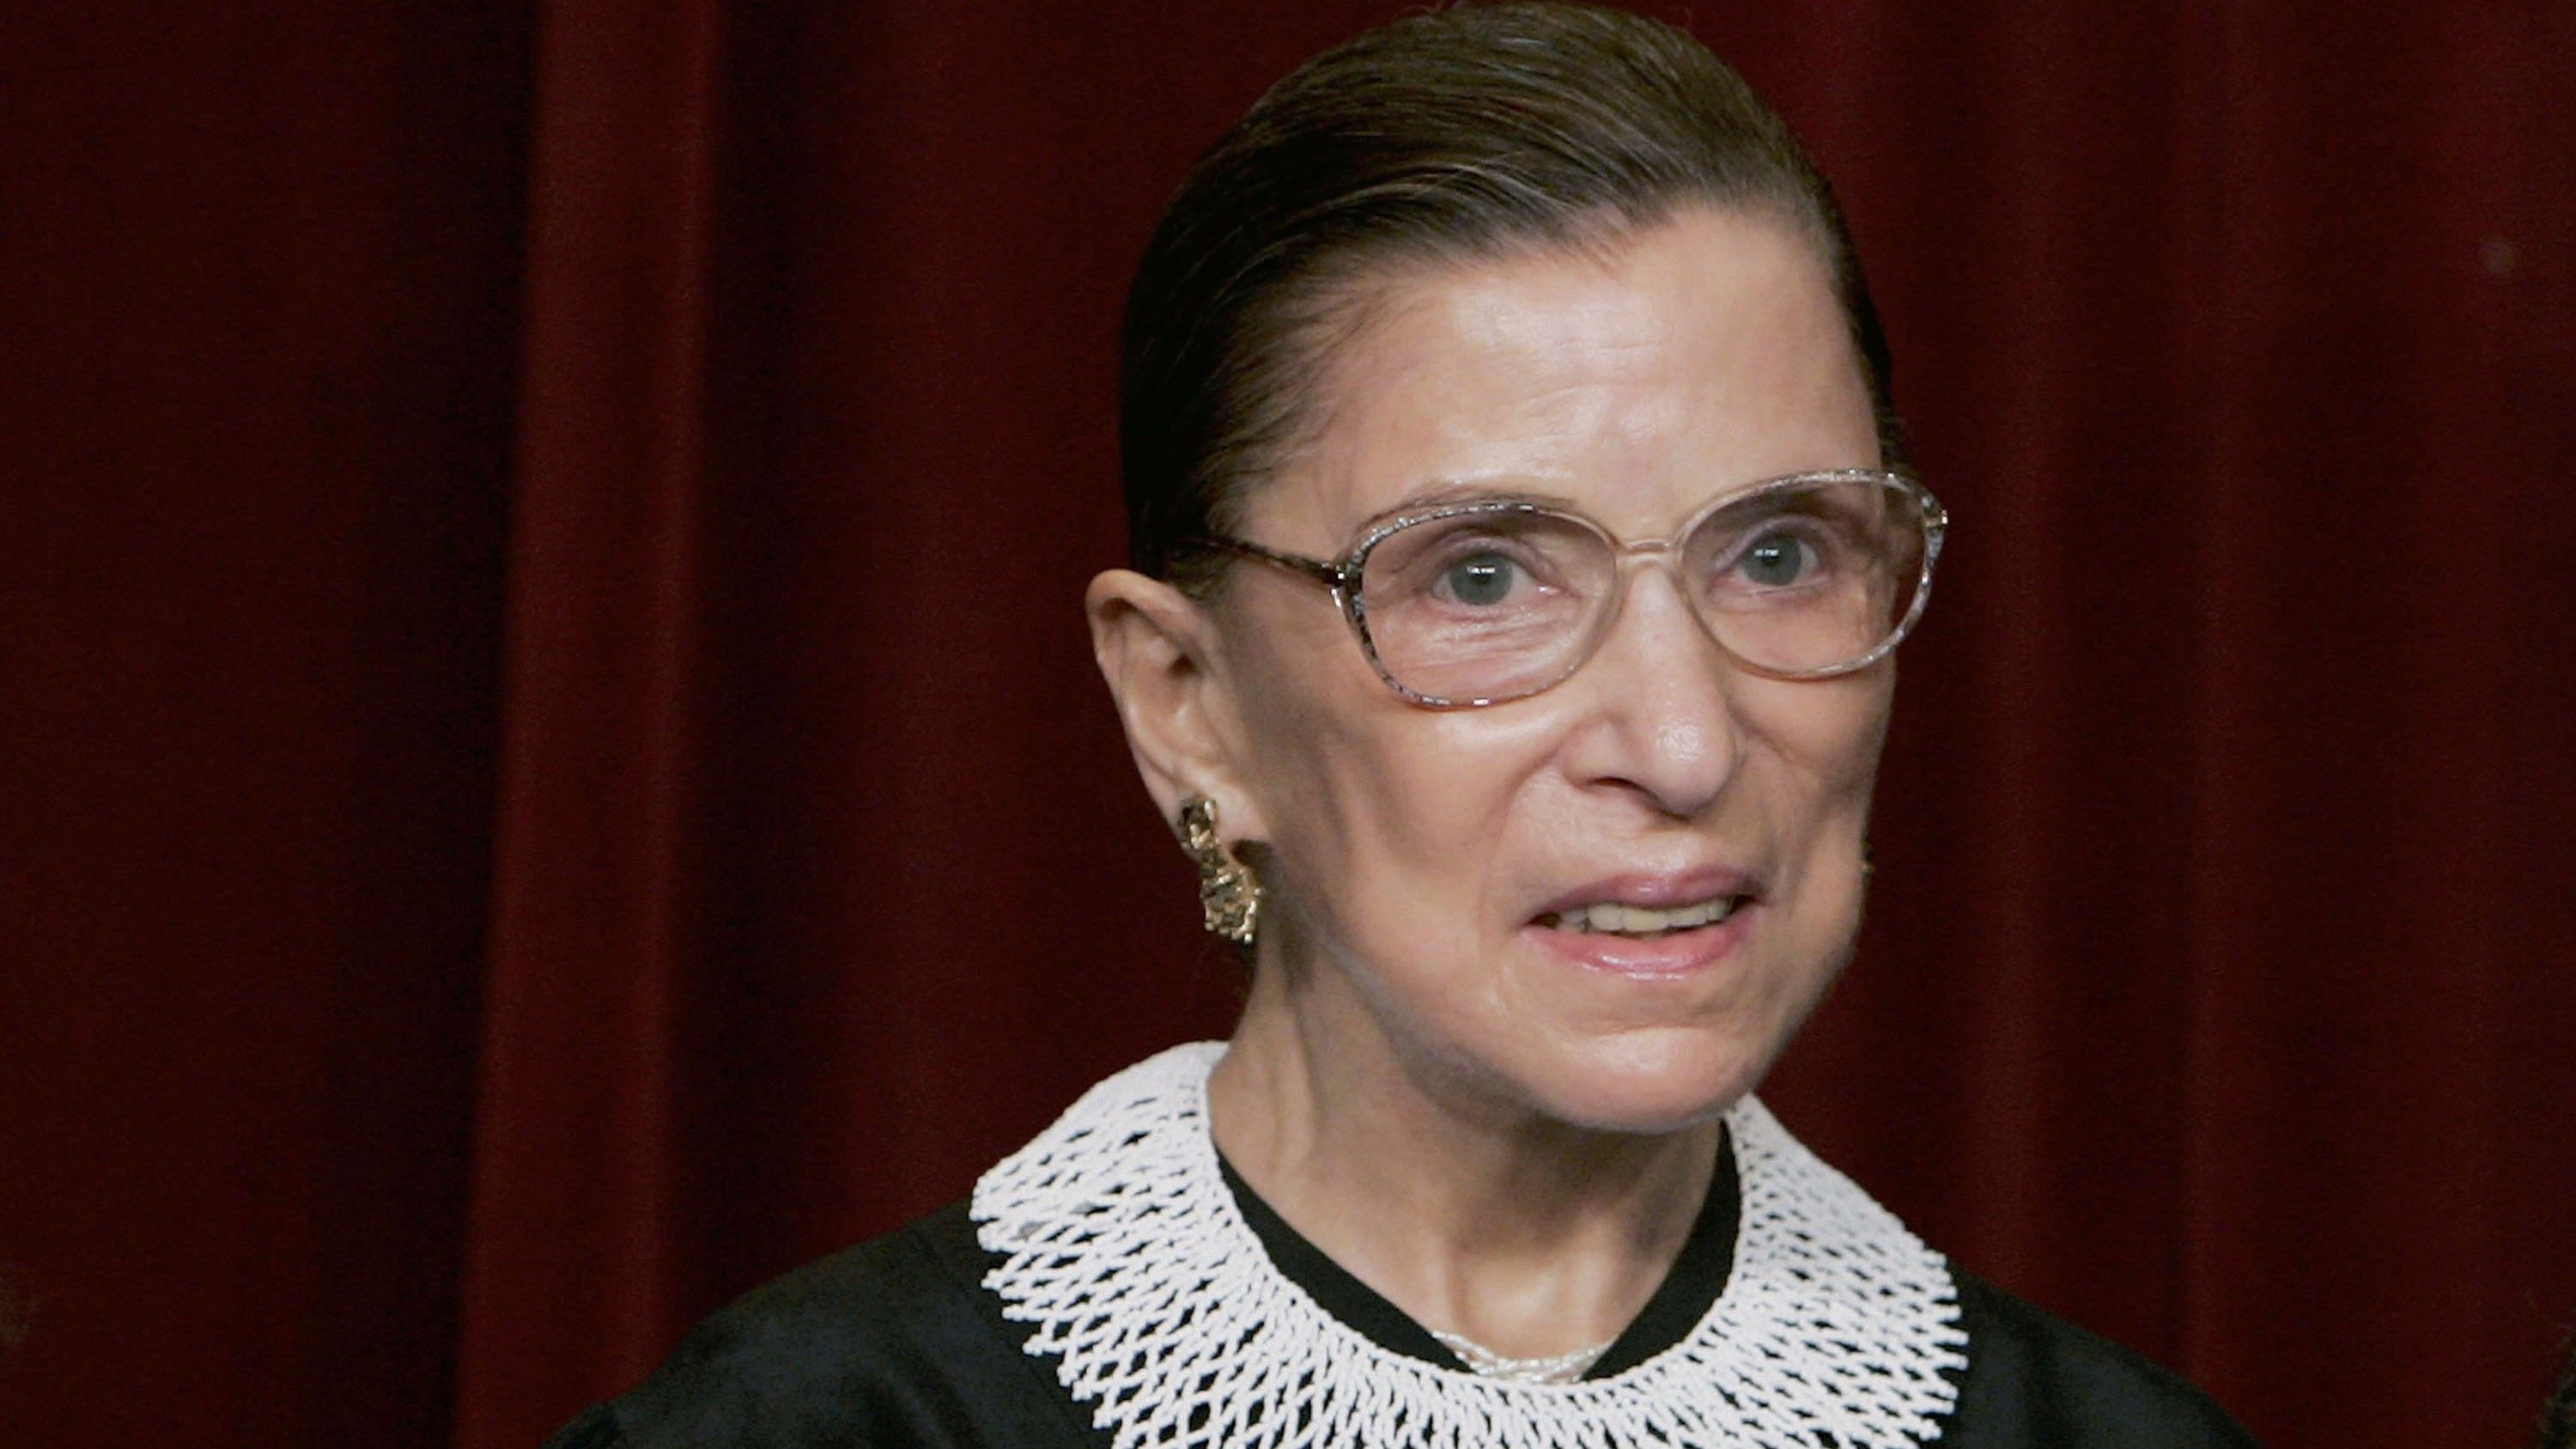 Supreme Court Justice Ruth Bader Ginsburg Offers Advice on Living, Working, and Parenting